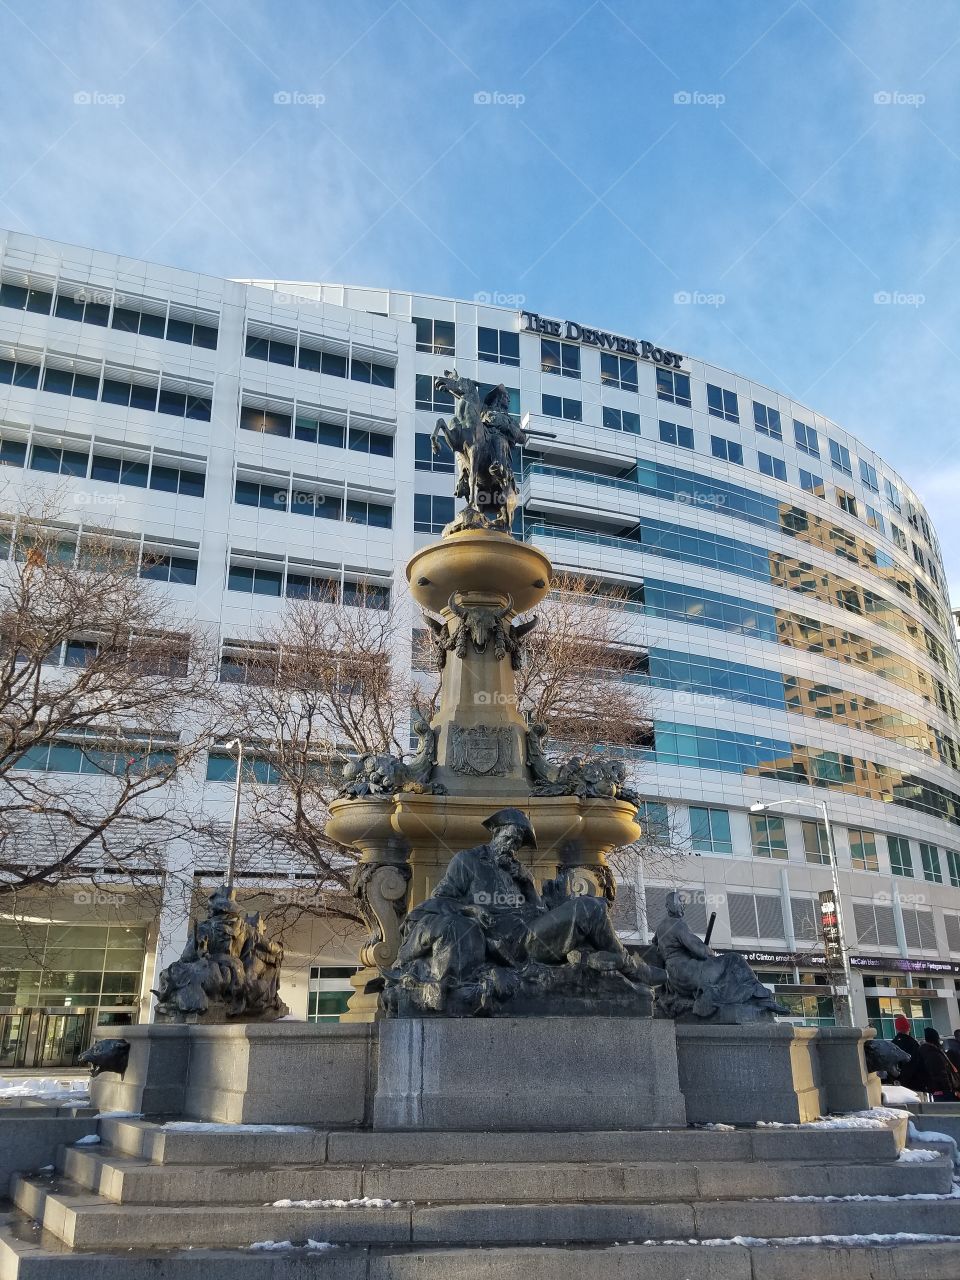 A beautiful fountain in front of the Denver post.